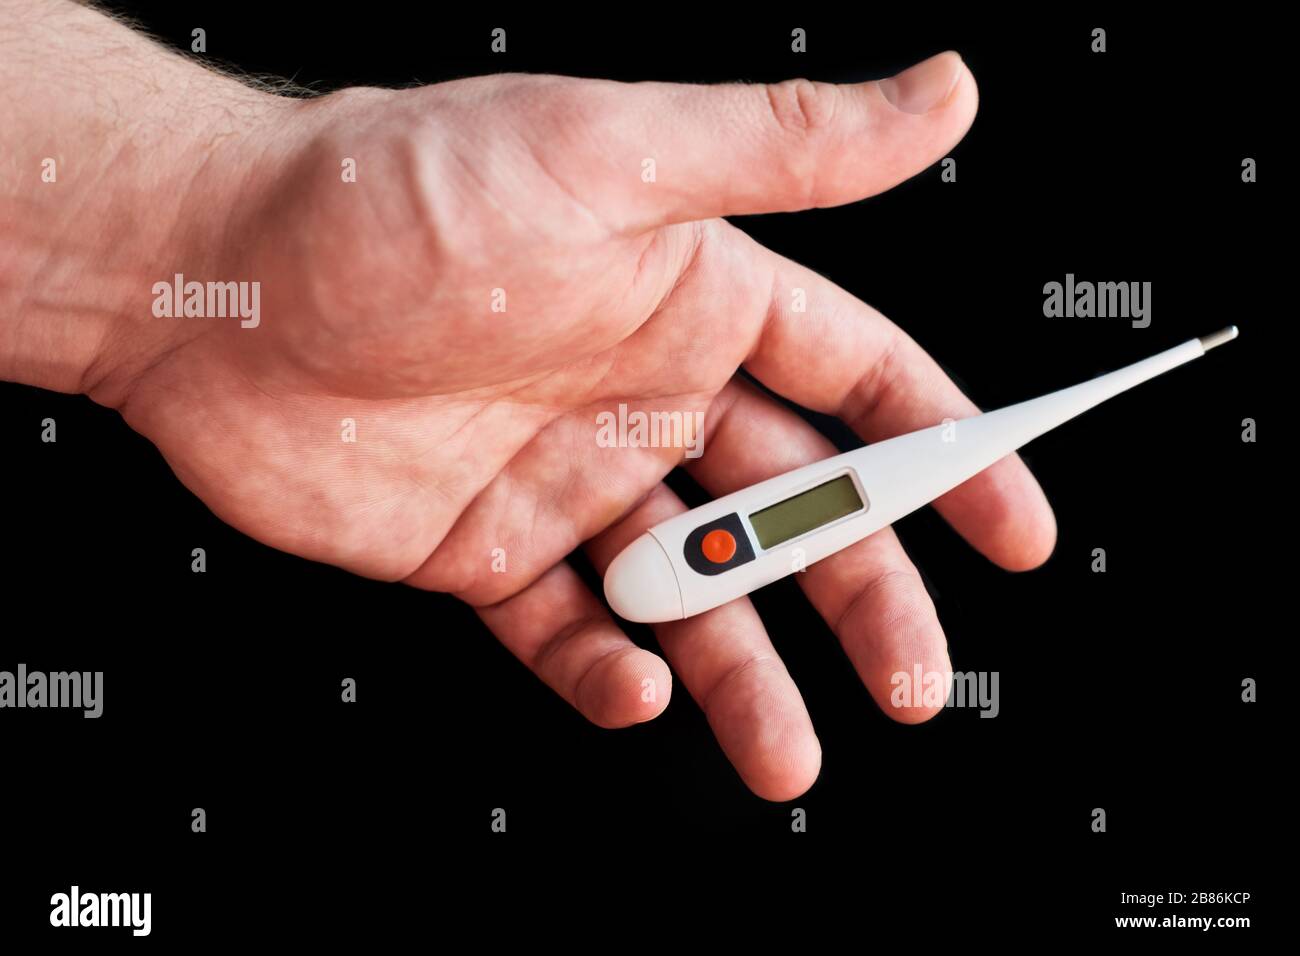 https://c8.alamy.com/comp/2B86KCP/electronic-thermometer-in-a-strong-male-hand-on-black-background-stop-coronavirus-2019-novel-coronavirus-2019-ncov-medical-content-2B86KCP.jpg